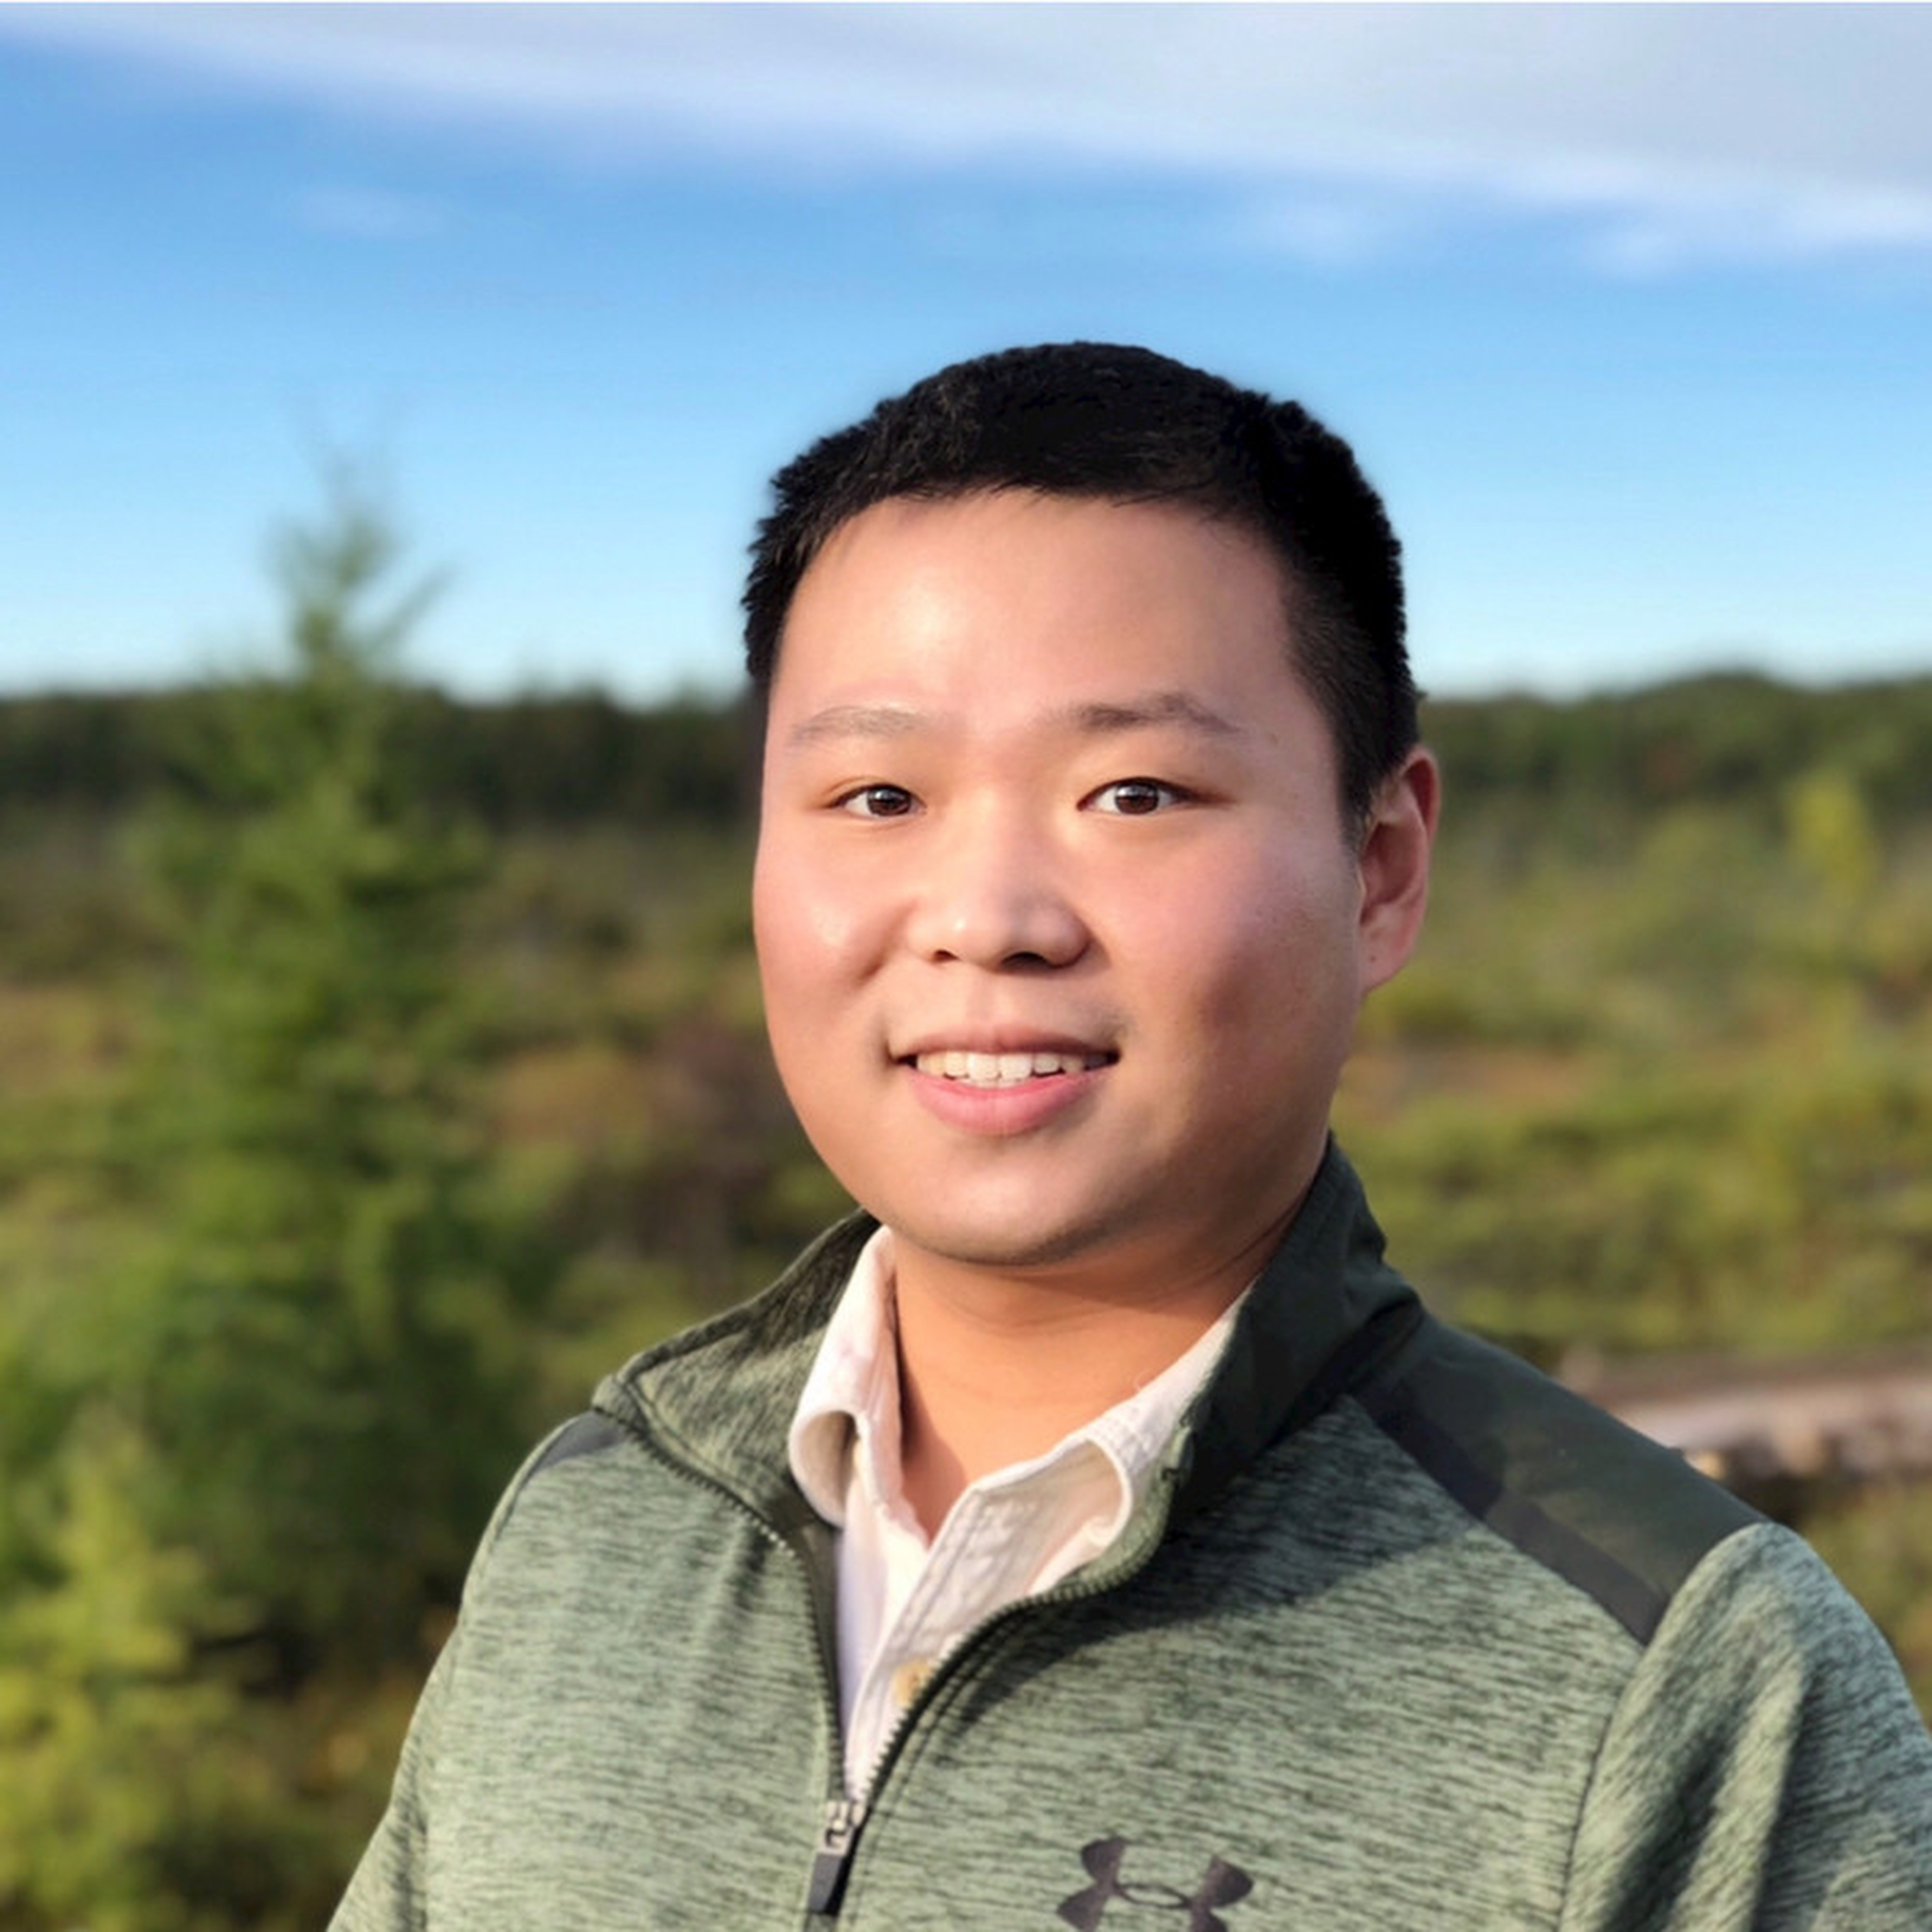 Dong Ensheng was the force behind the Johns Hopkins Covid map, which will end updates on March 10. Photo: Linkedin